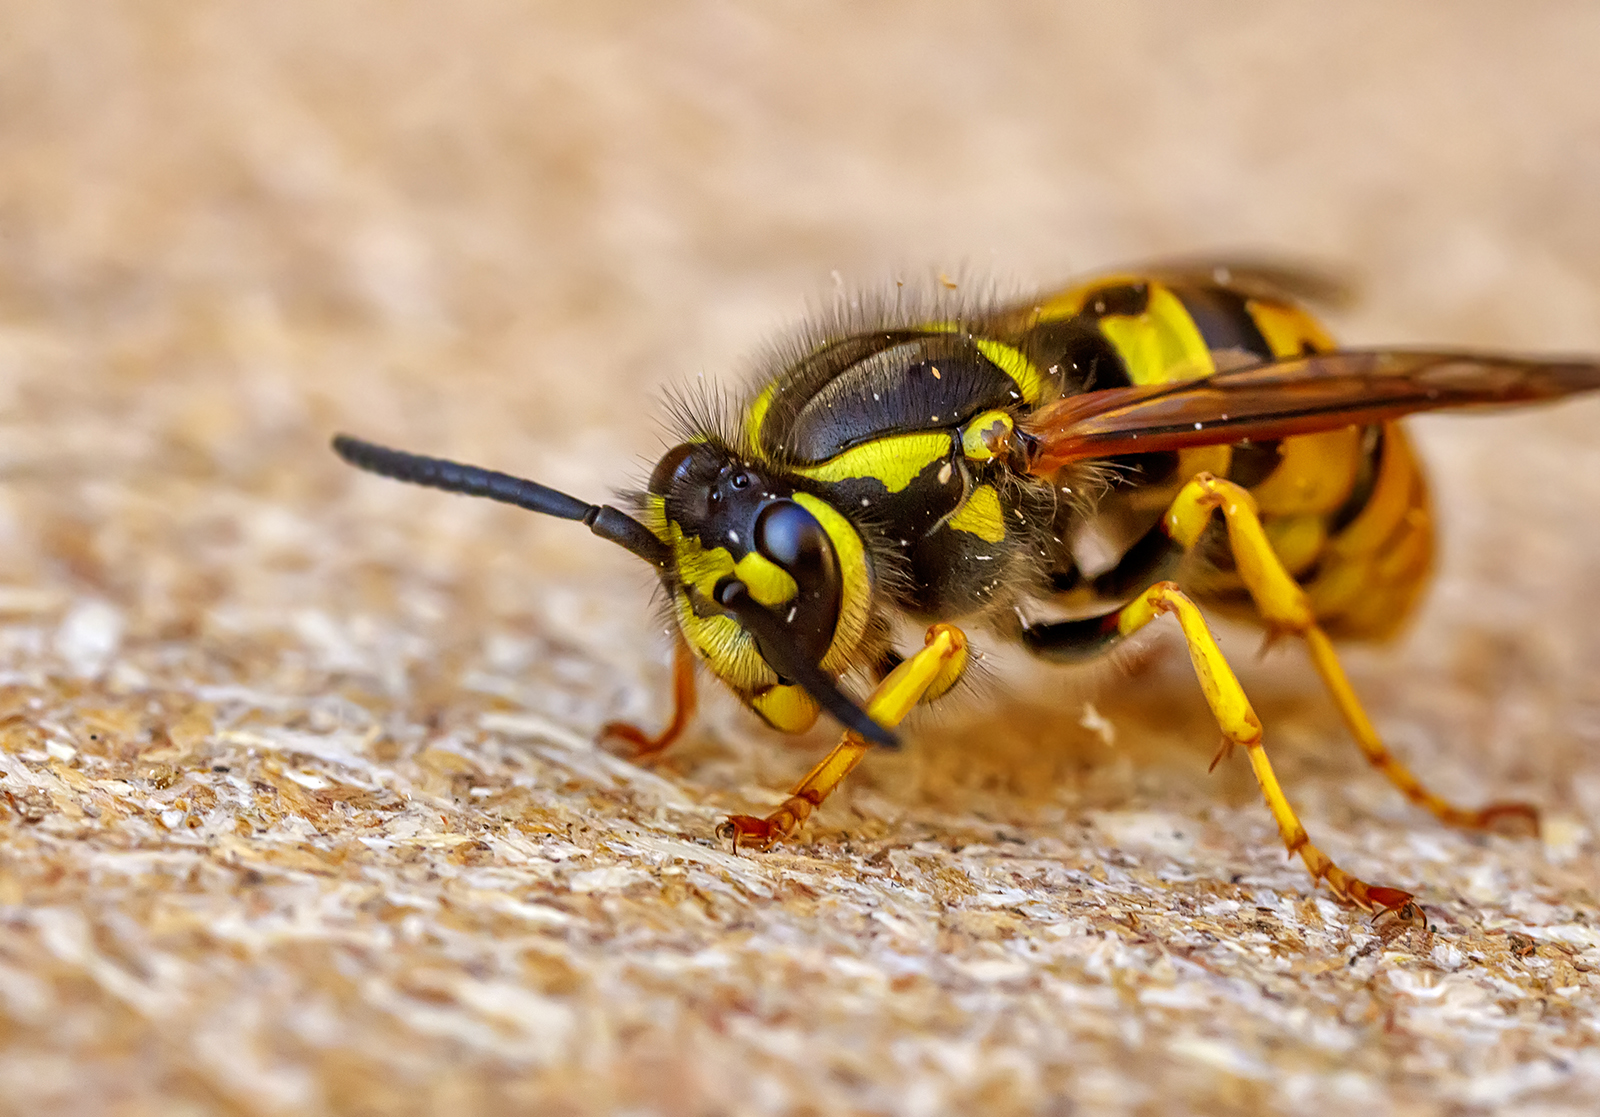 Can wasps sting through clothes?